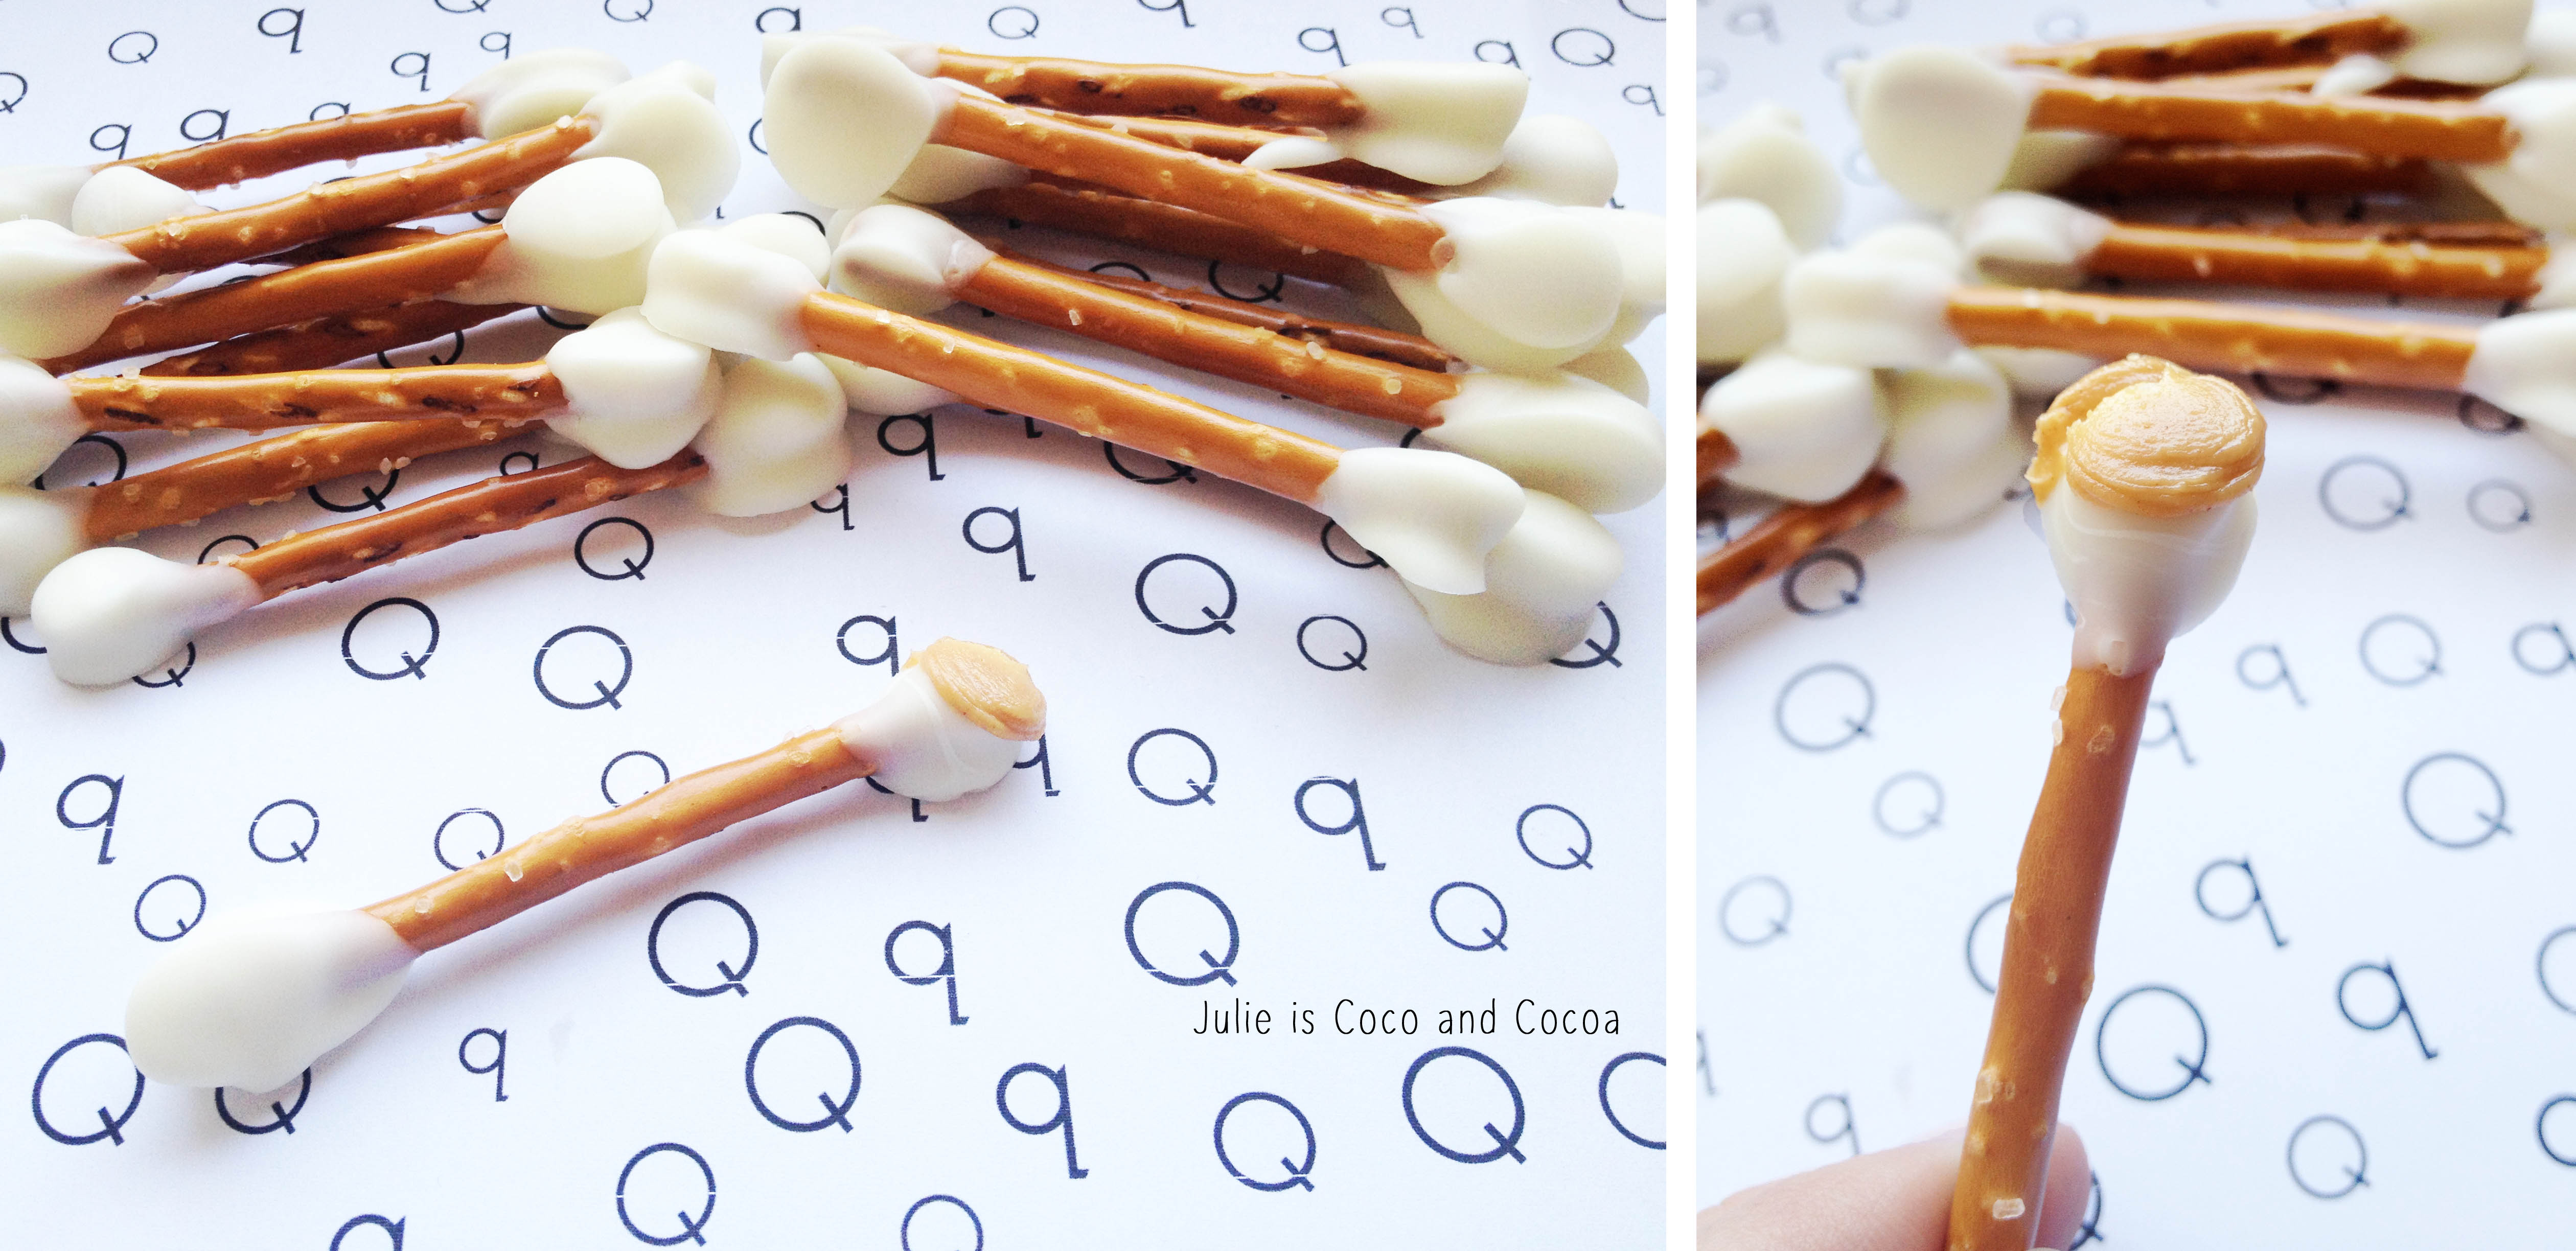 letter q edible qtip used